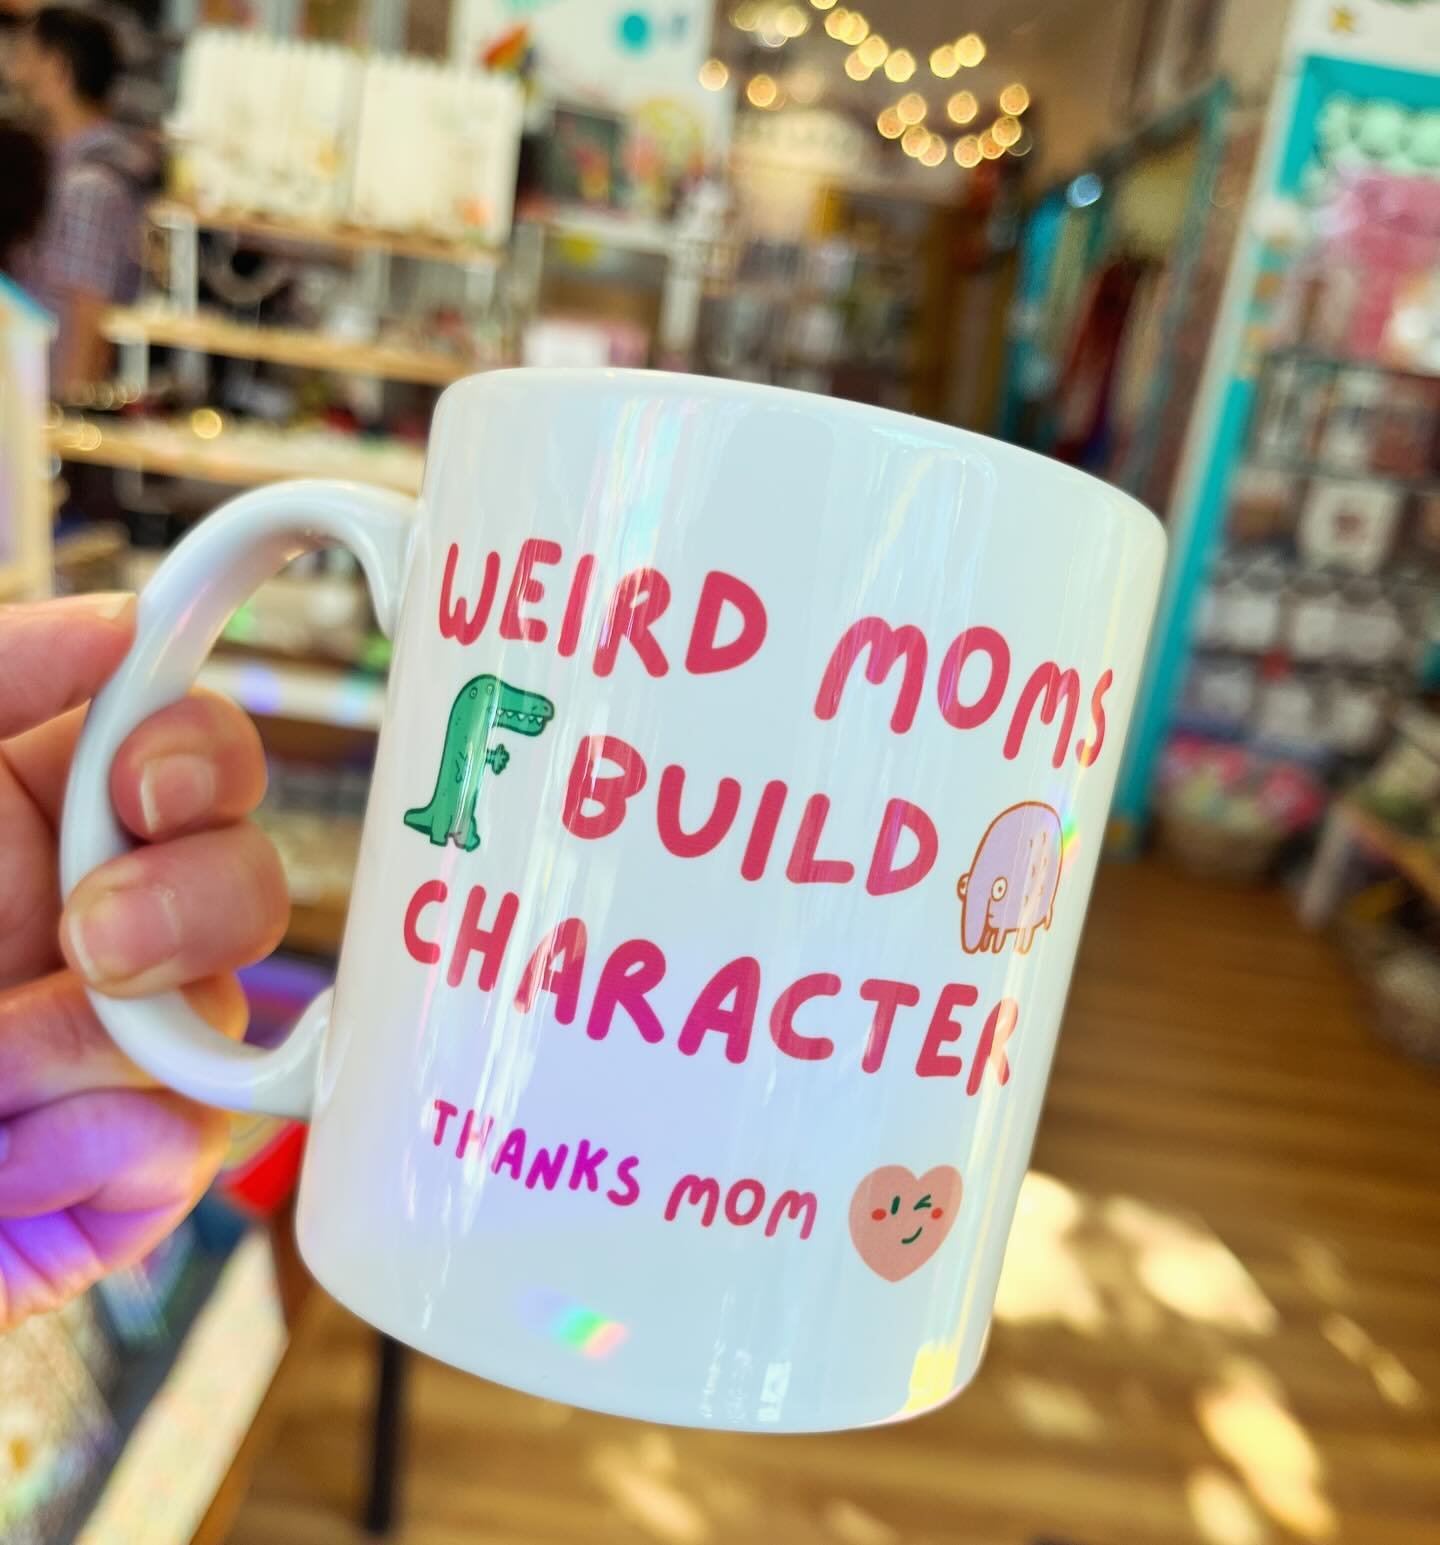 Let&rsquo;s celebrate the weird and funny moms! We&rsquo;re the best, I hope (fingers crossed) 🤞🥸🪿. Don&rsquo;t forget, we can make custom printed mugs etc. Best part is that we help you design it. Just email us the pictures and ideas. Deadline is